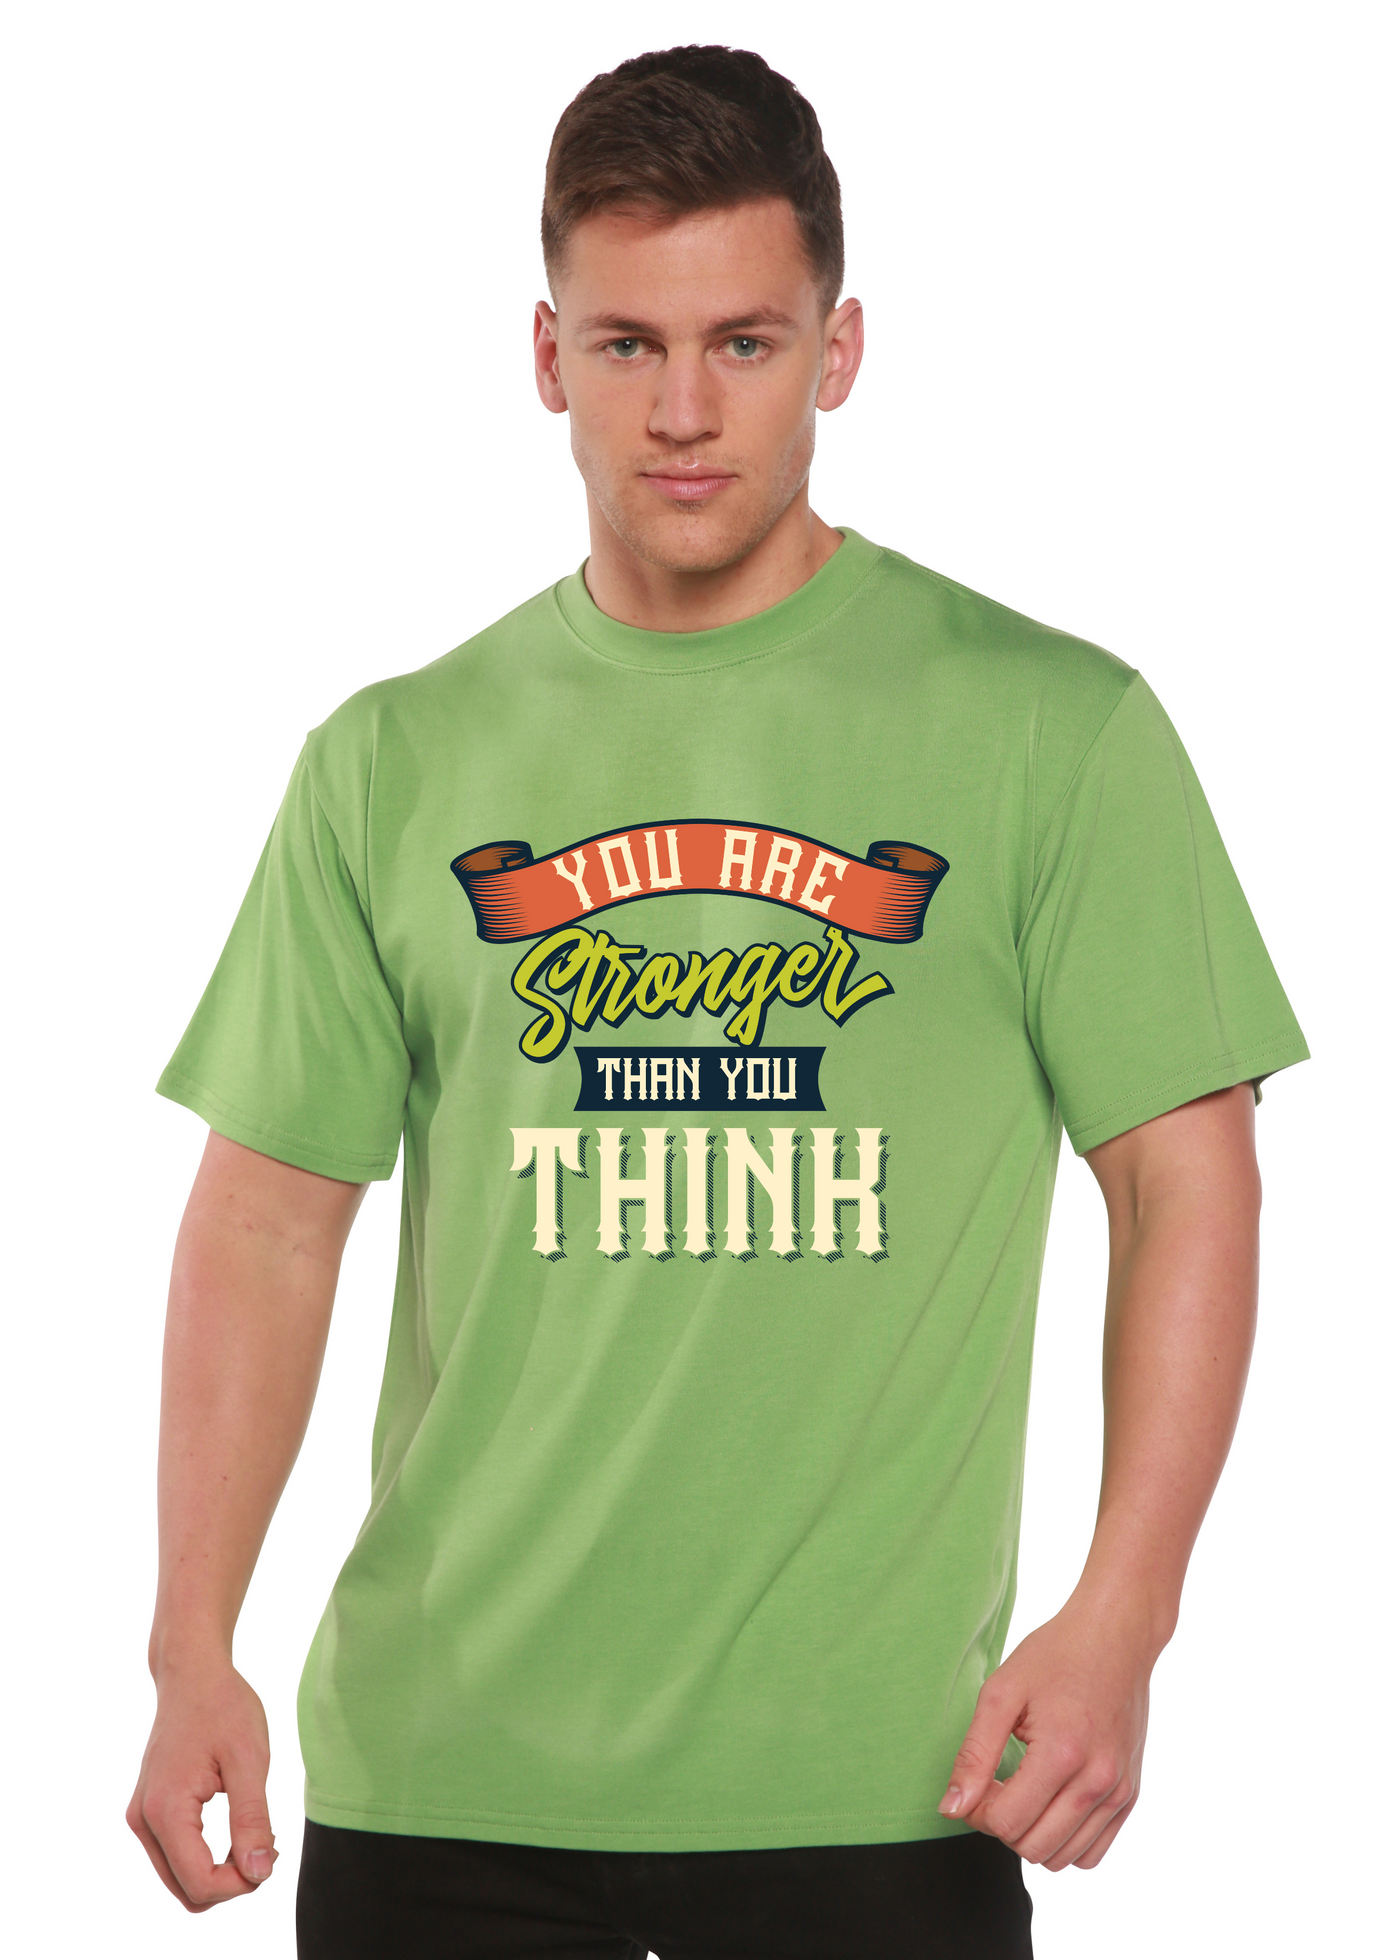 You Are Stronger Than You Think men's bamboo tshirt green tea